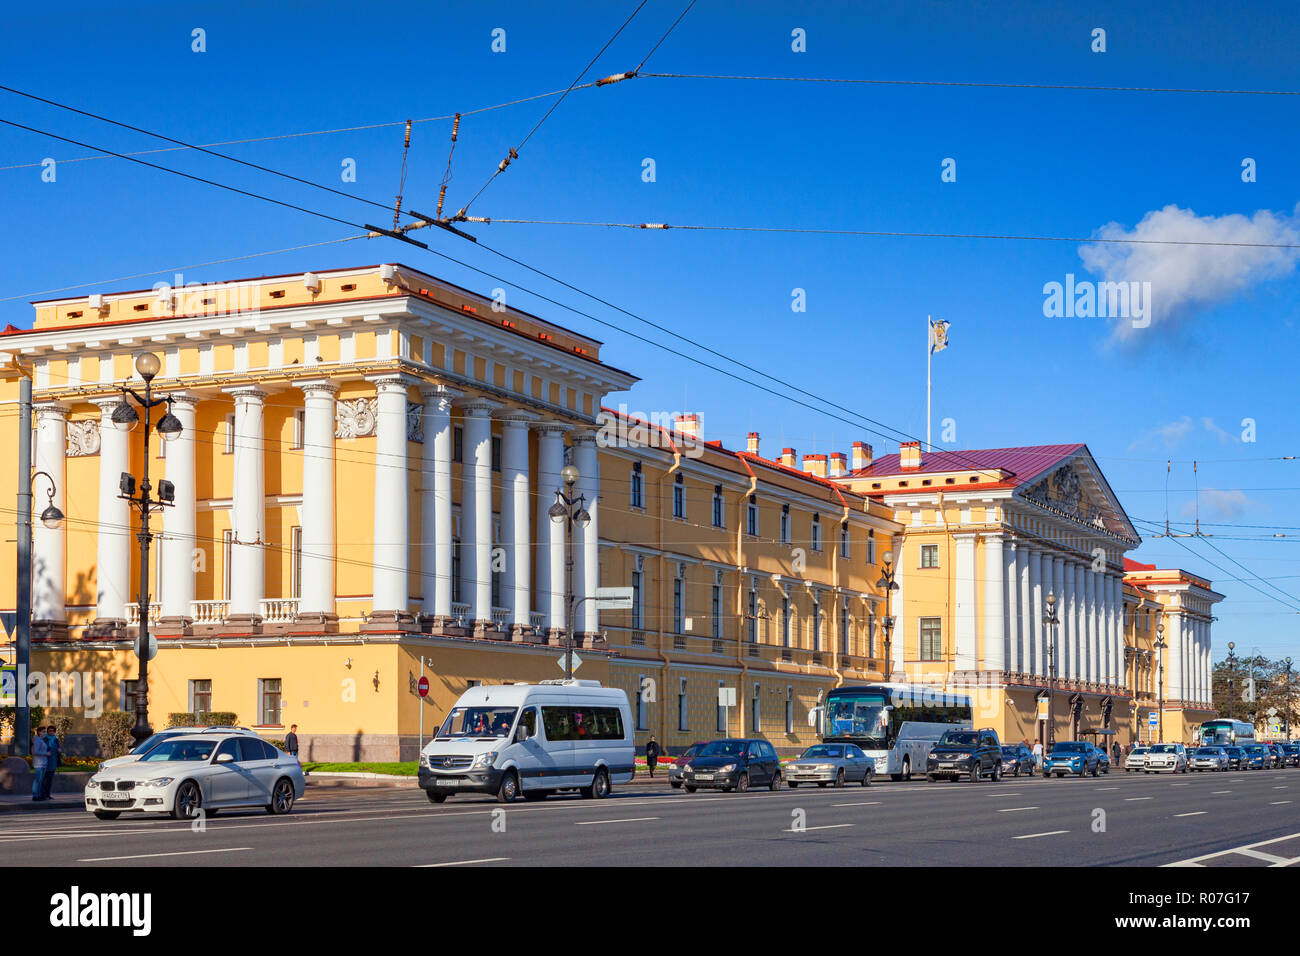 18 September 2018: St Petersburg, Russia - The Admiralty, headquarters of the Russian Navy. Stock Photo